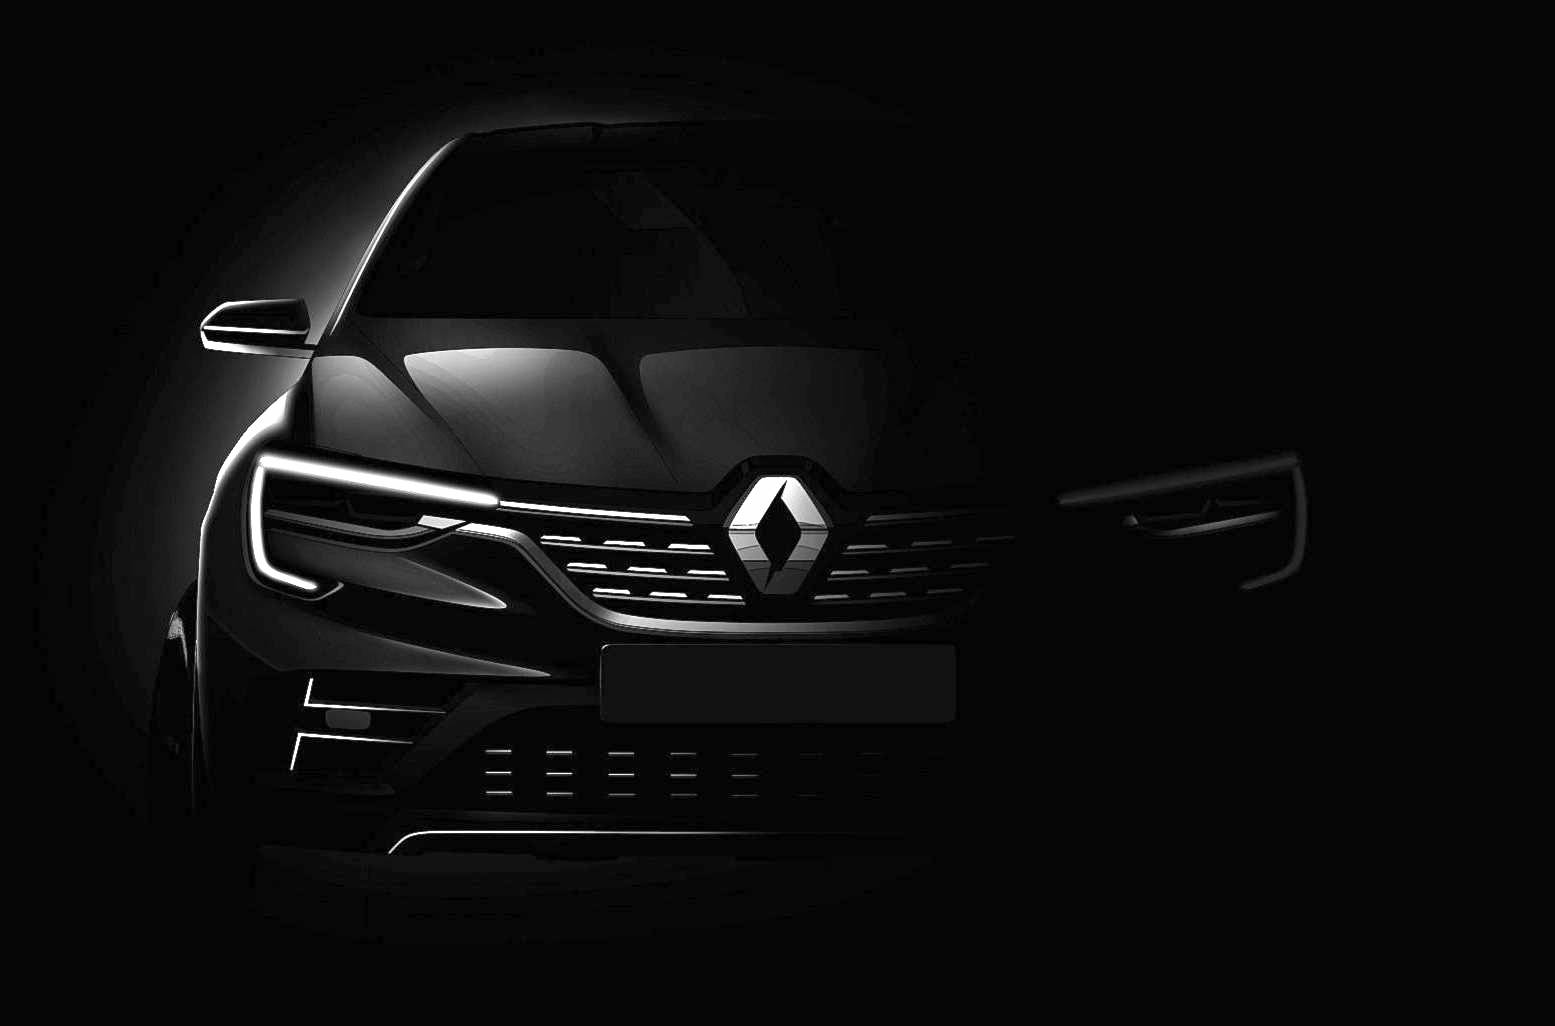 Renault previews new compact SUV, to debut at Moscow show